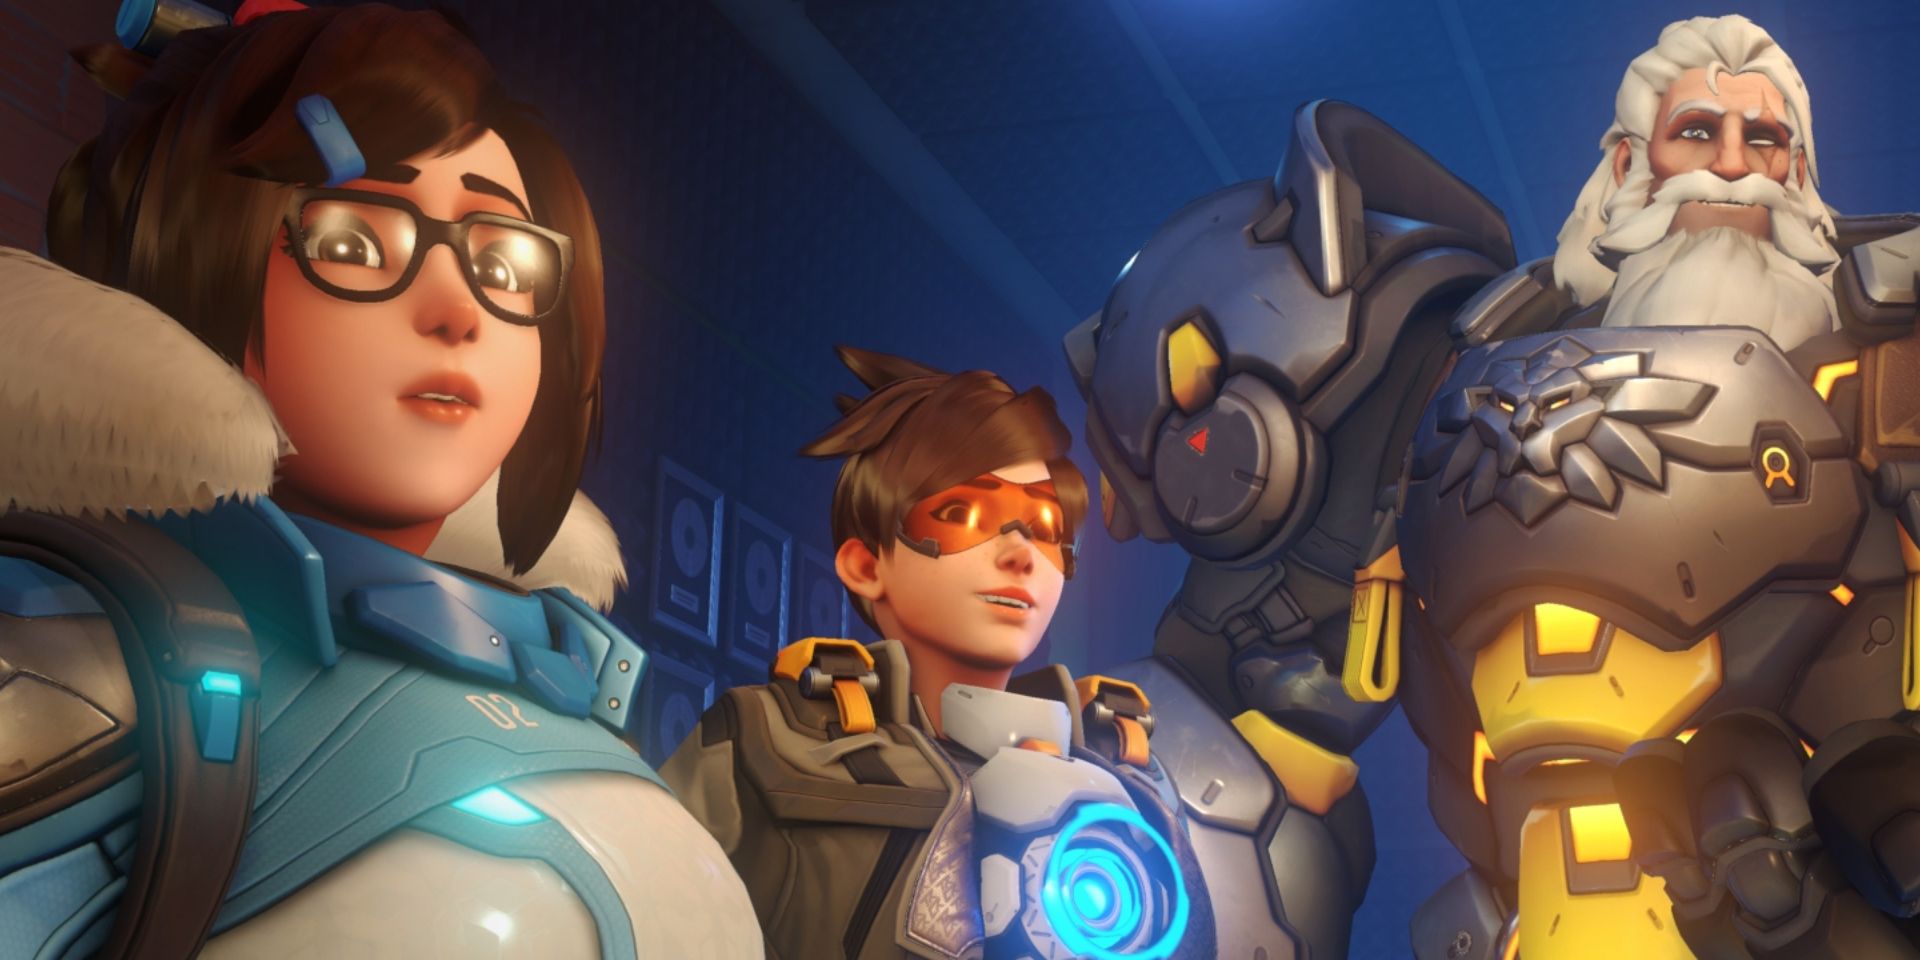 Overwatch 2 Director Teases Large New Feature To Be Announced Soon